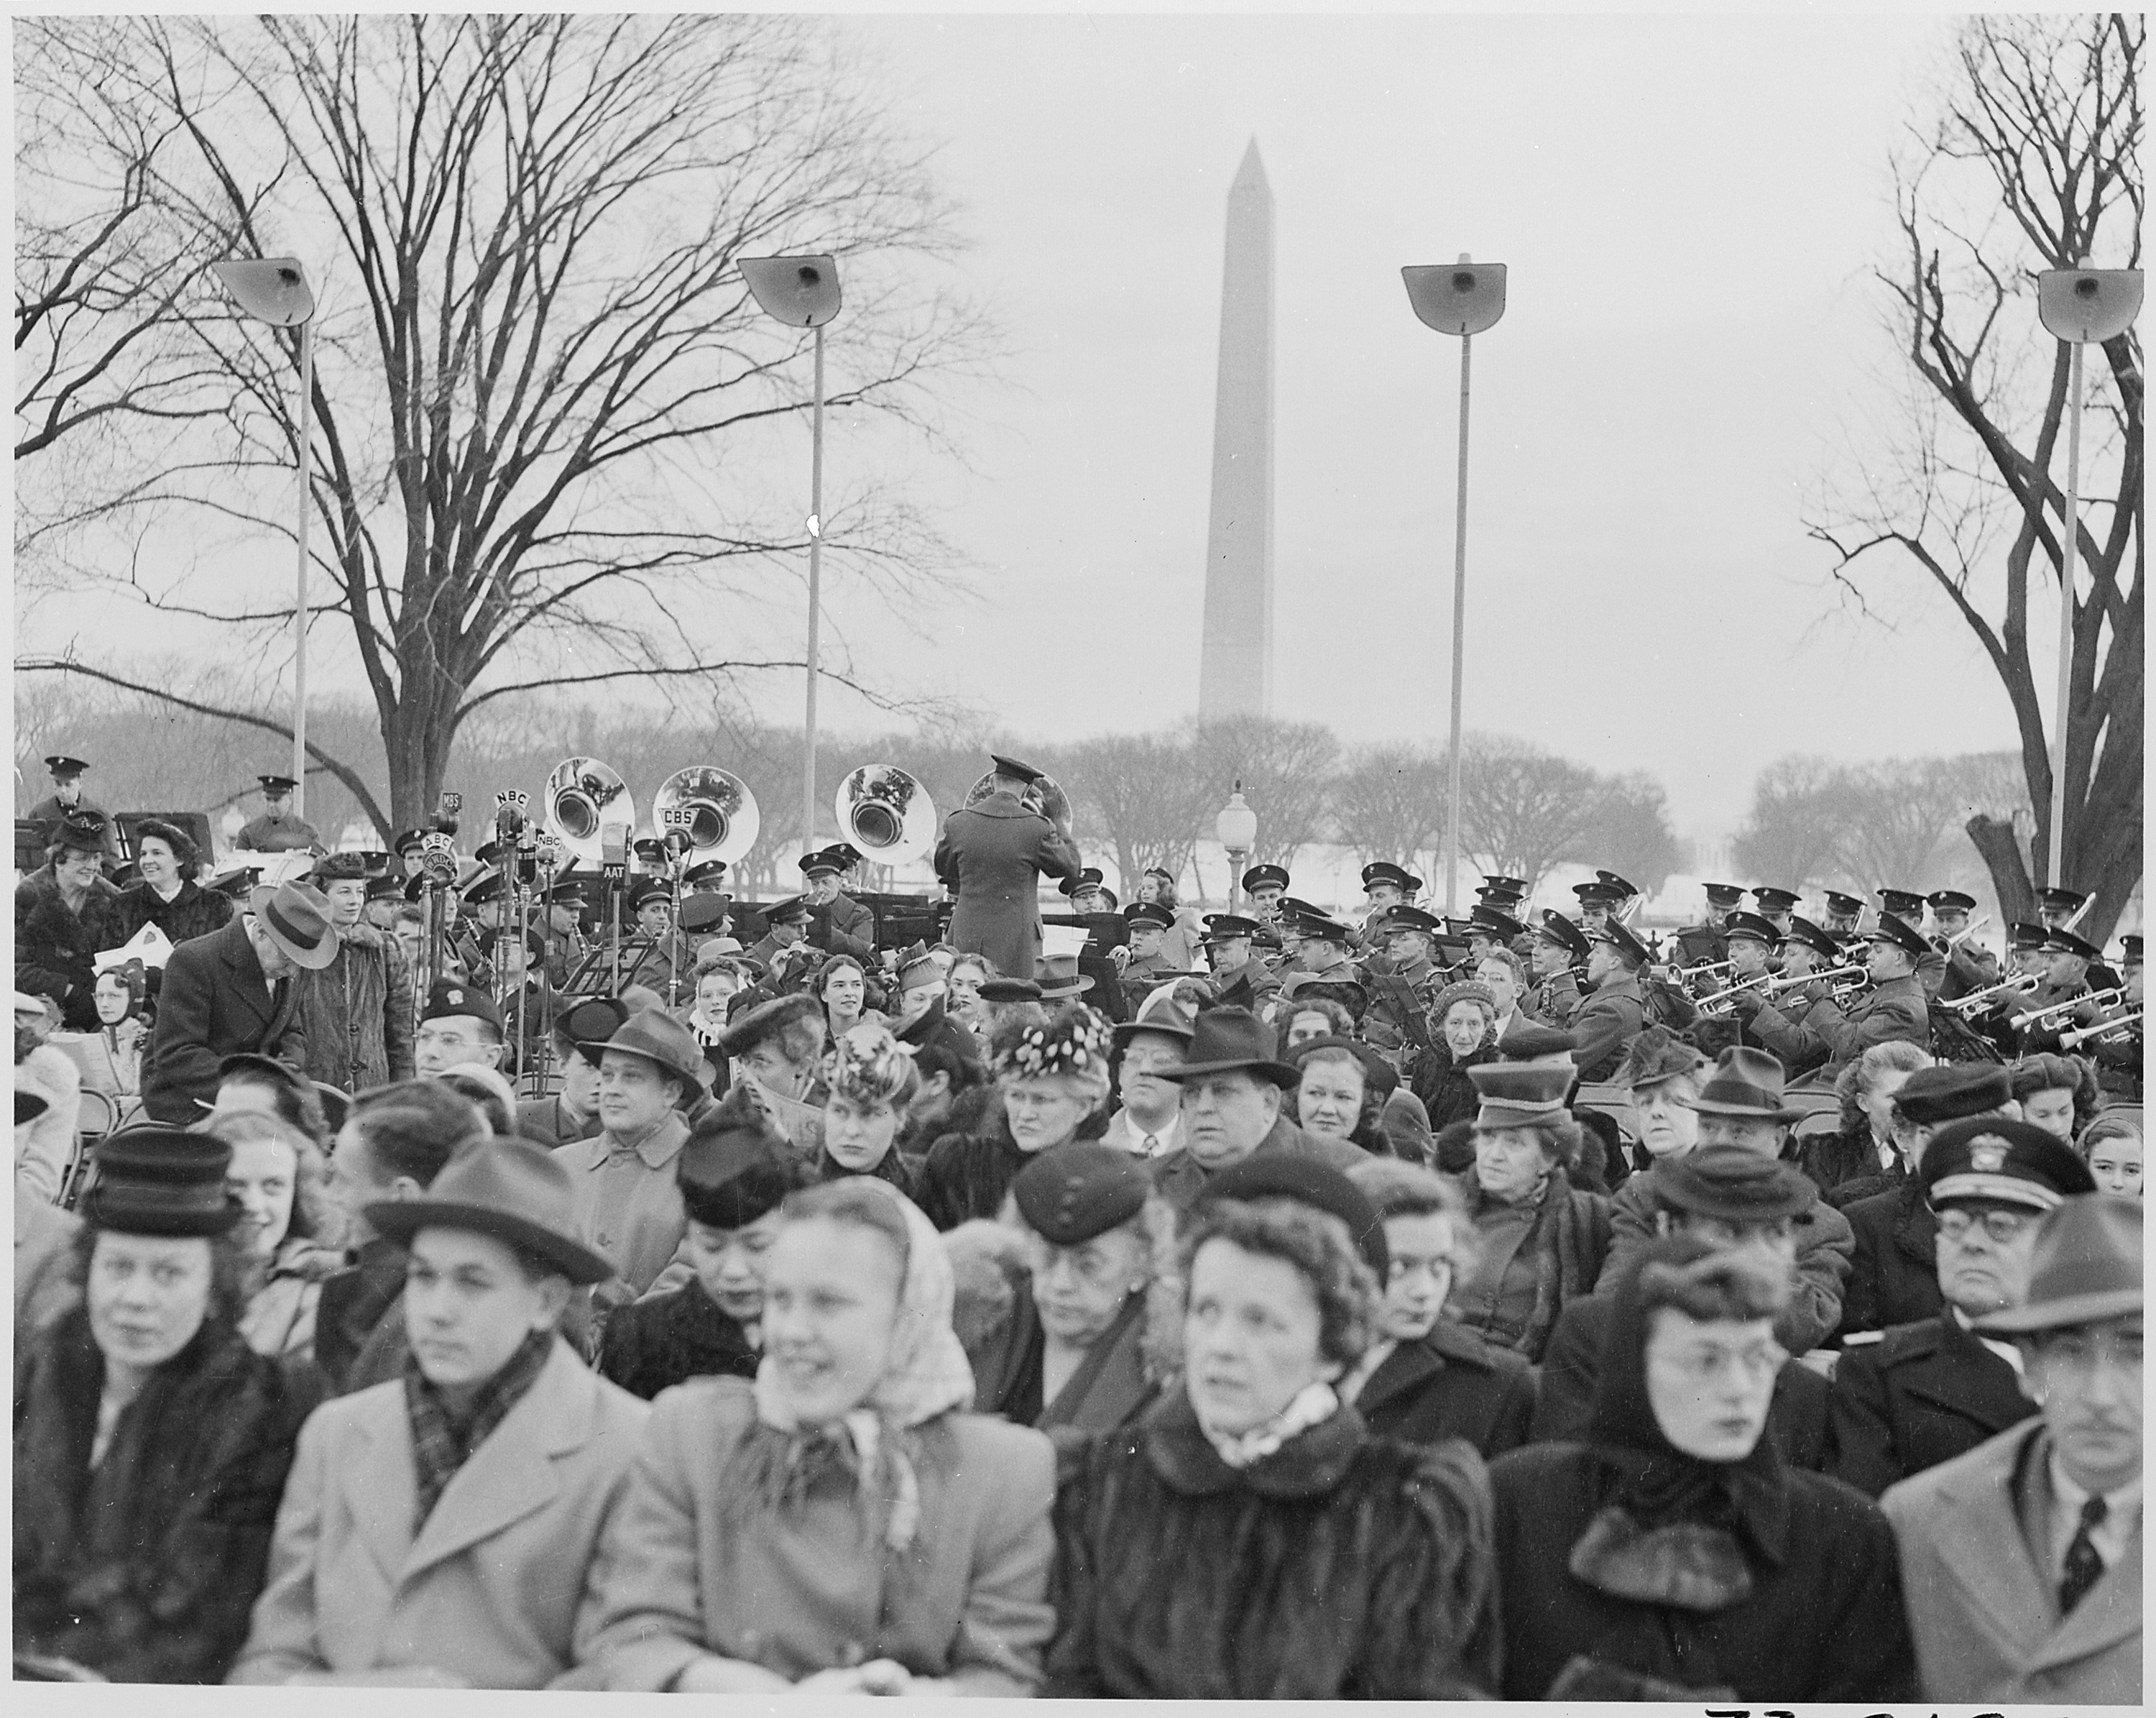 Photograph_of_the_crowd_gathered_on_the_South_Lawn_of_the_White_House_for_the_ceremonial_lighting_of_the_National..._-_NARA_-_199280.tif